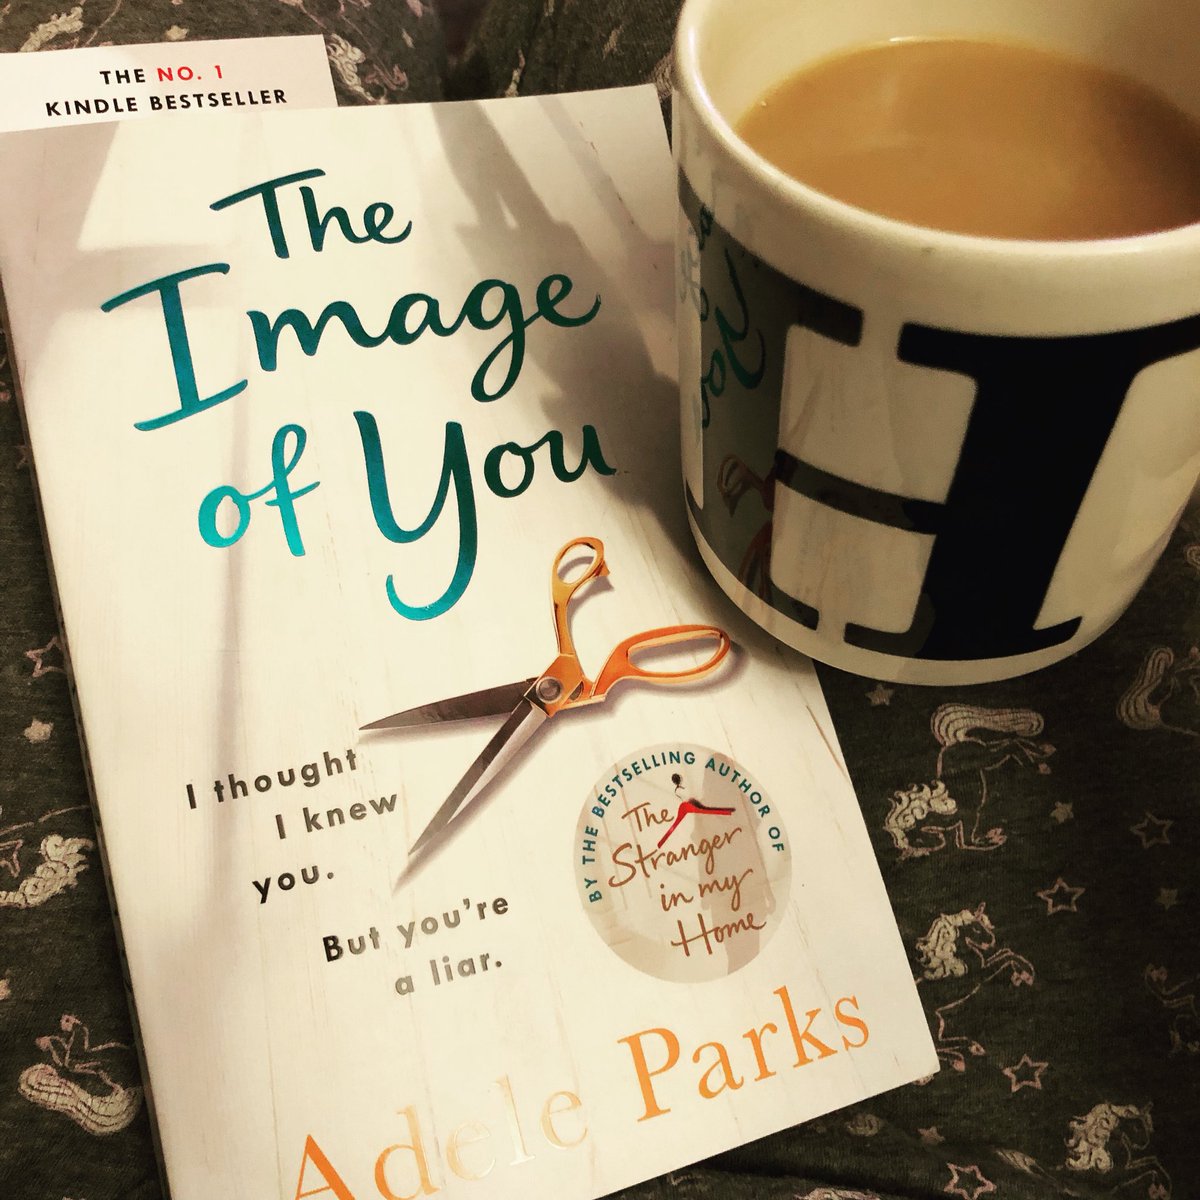 📚Pjs on, cuppa and a spot of late night reading....perfect! #lovebooksactually #fridaynightreading #unicornsarelife #adeleparks #theimageofyou